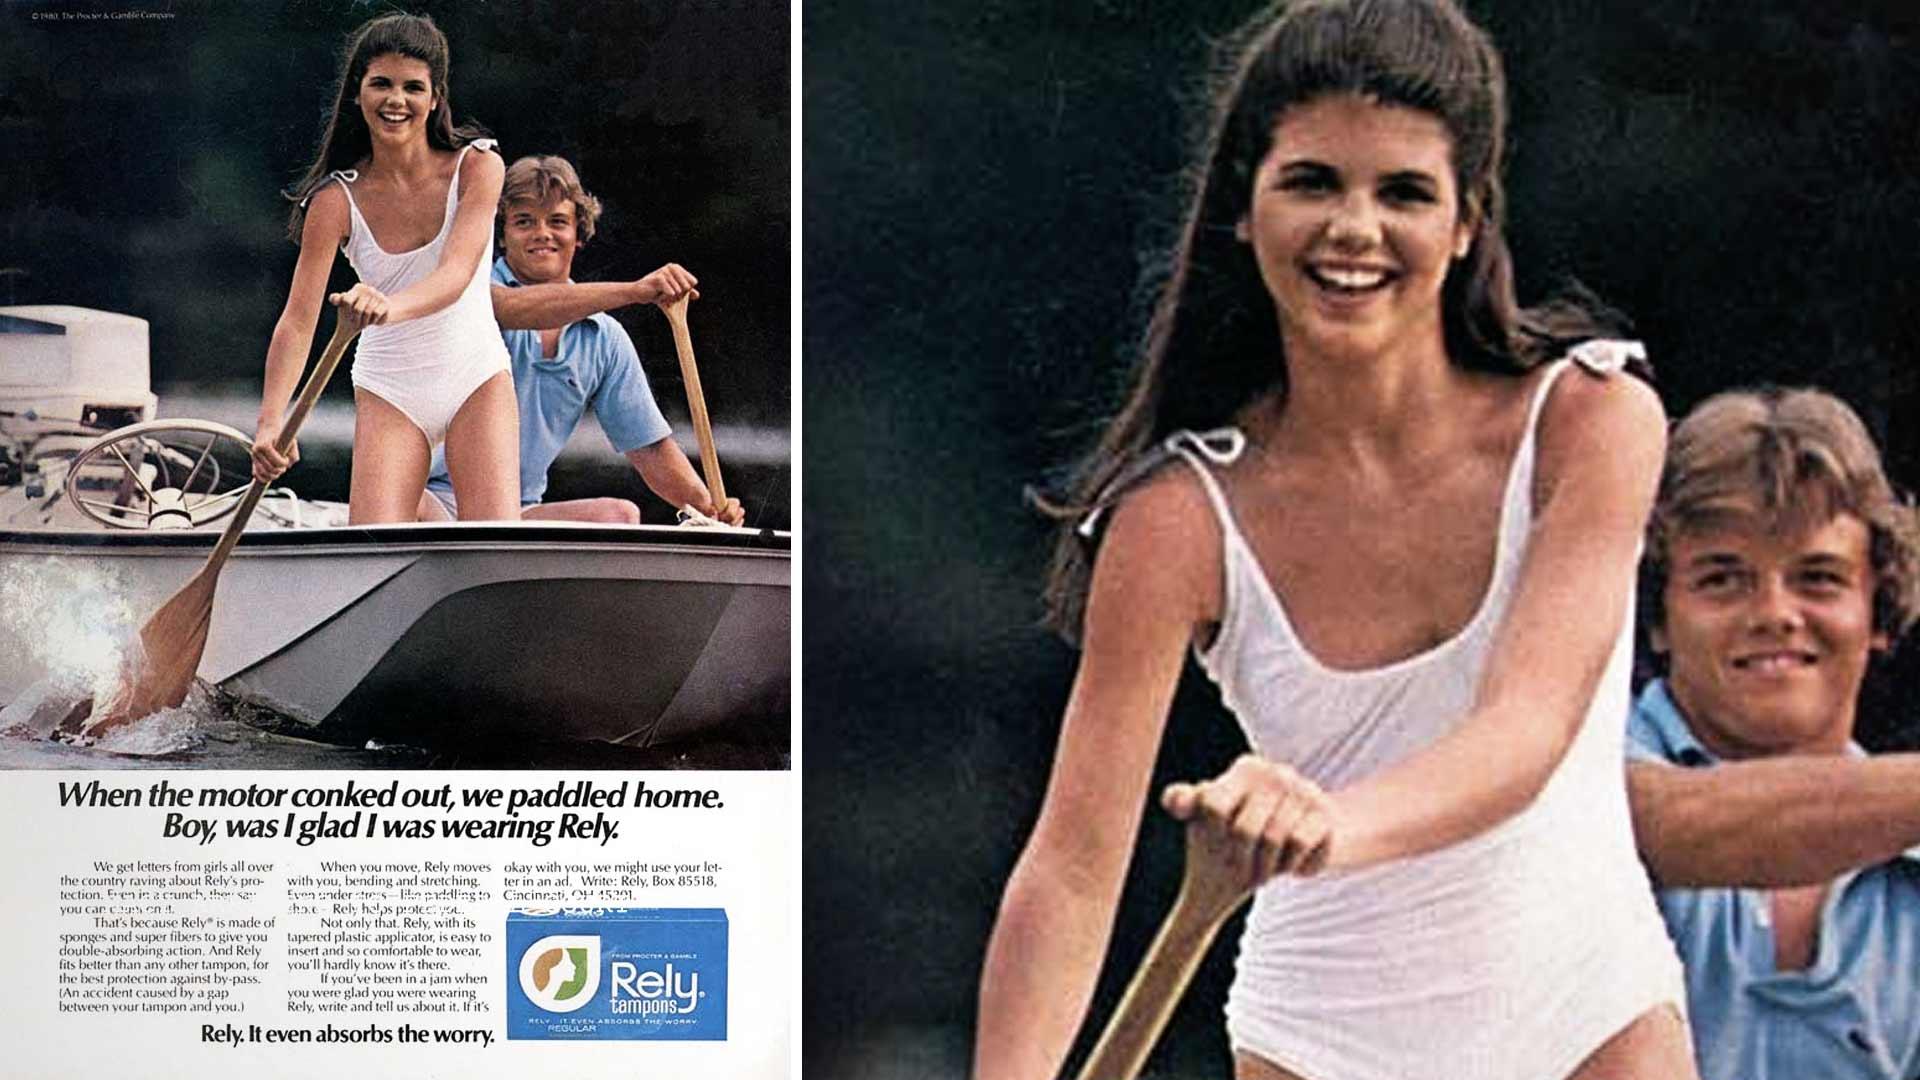 Lori Loughlin Was a Master at Fake Rowing Long Before Allegedly Staging Daughters’ Crew Careers for College